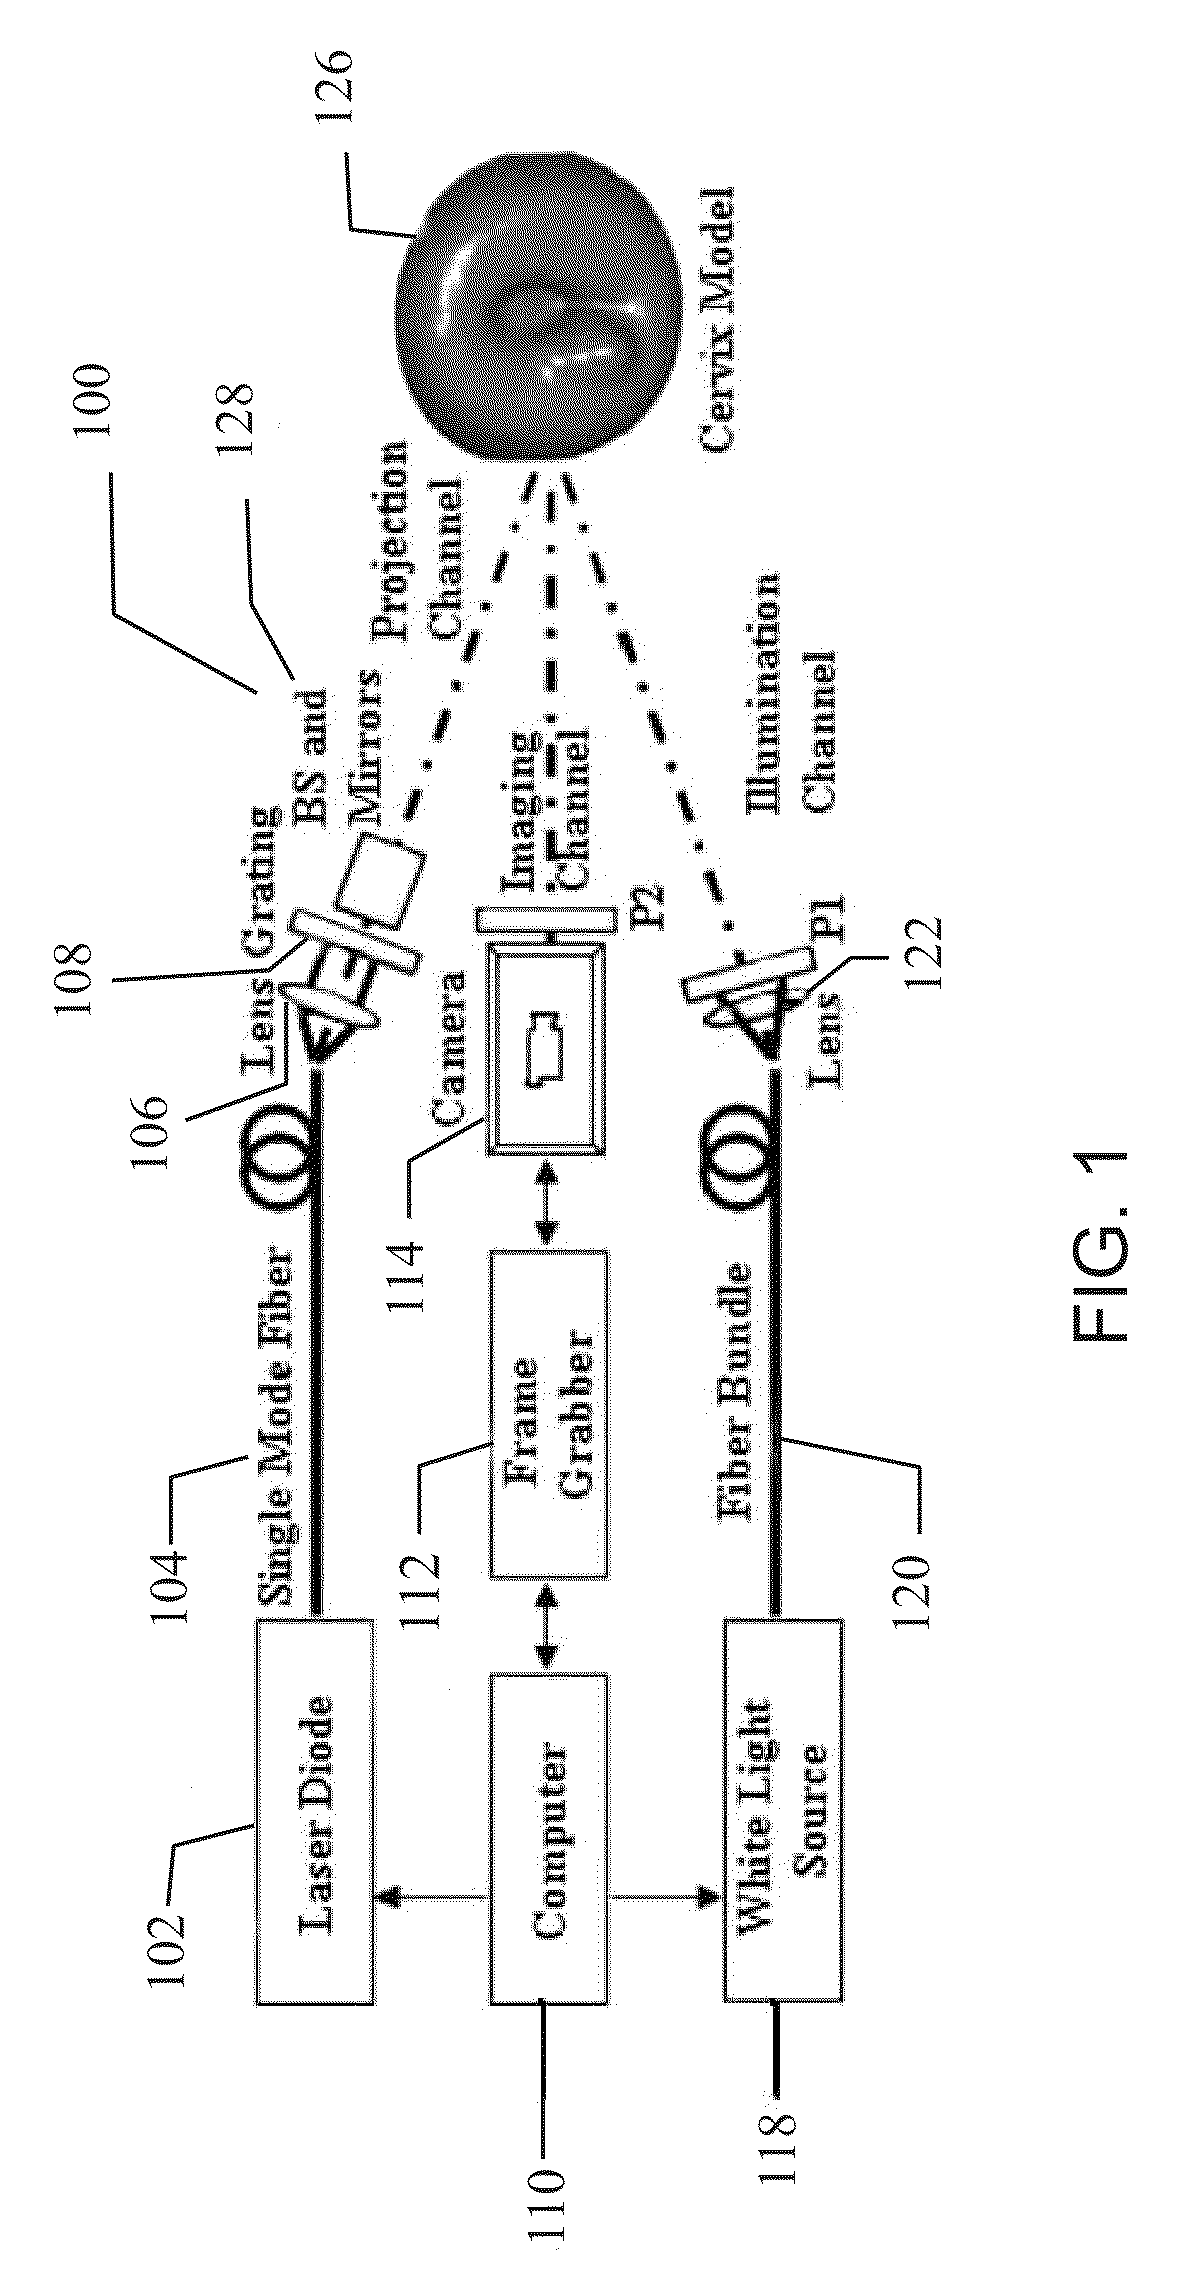 Apparatus and method of optical imaging for medical diagnosis